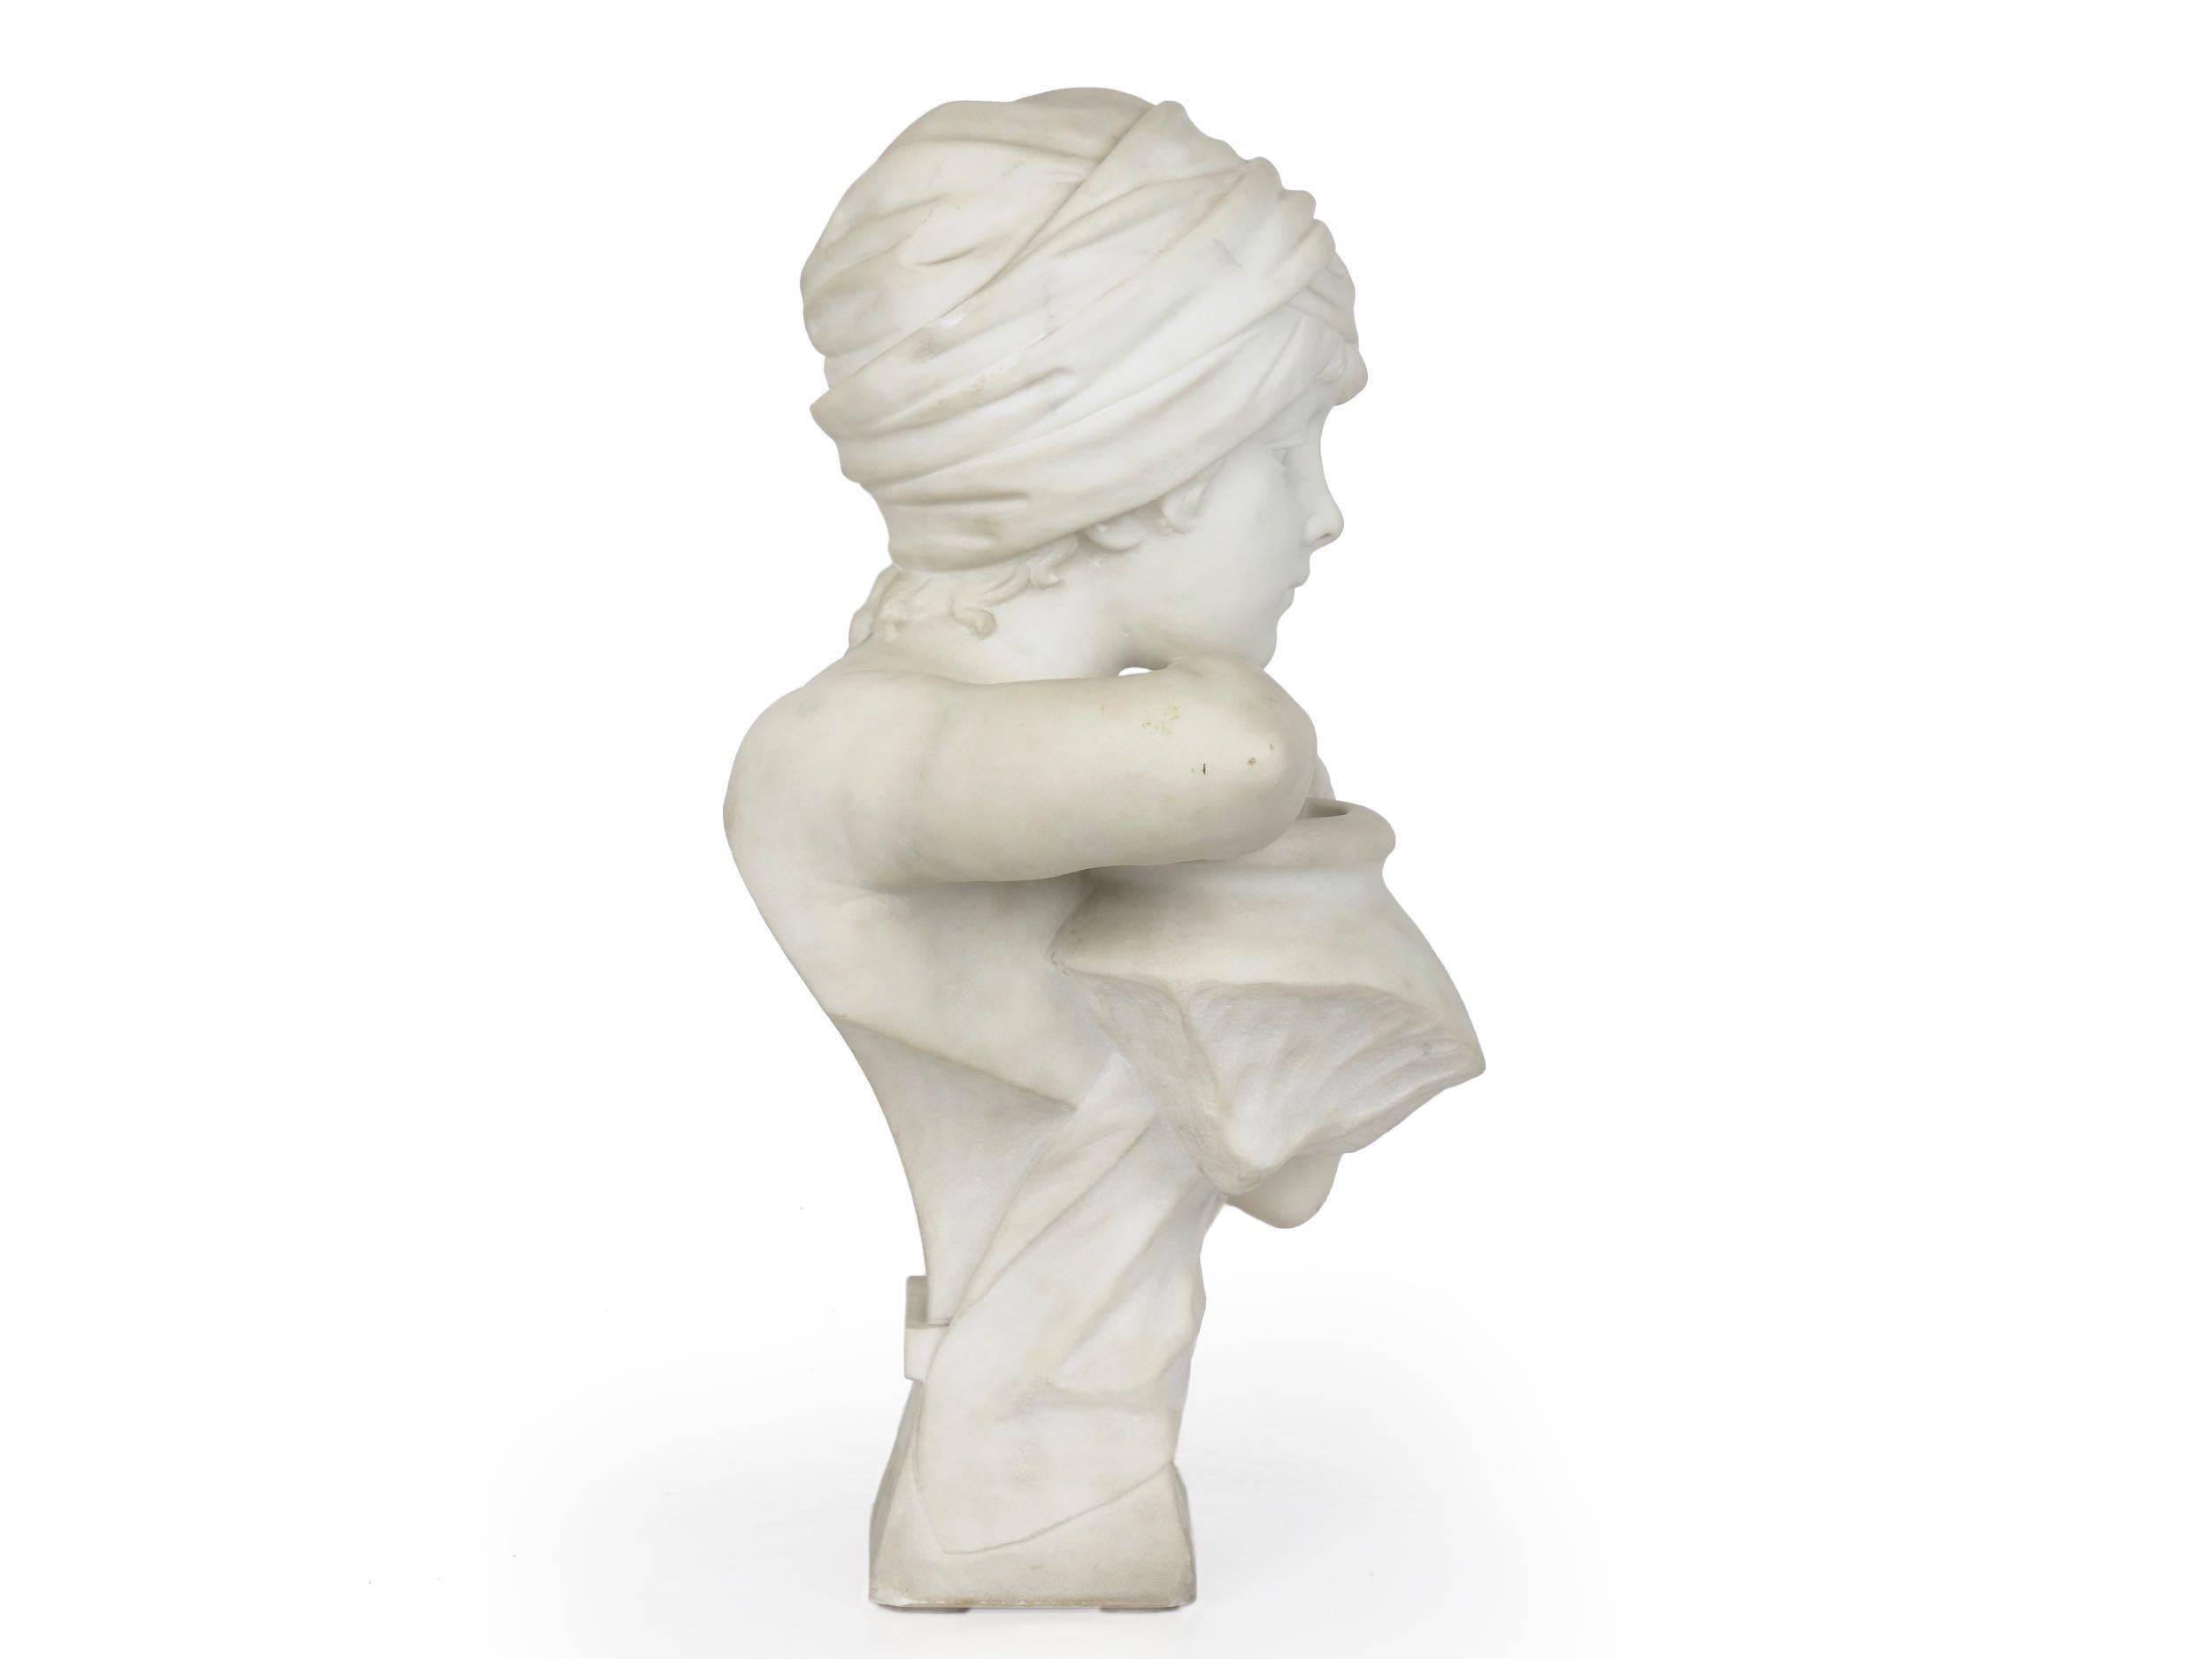 19th Century “Rebecca at the Well” Italian Marble Antique Bust Sculpture by Antonio Piazza